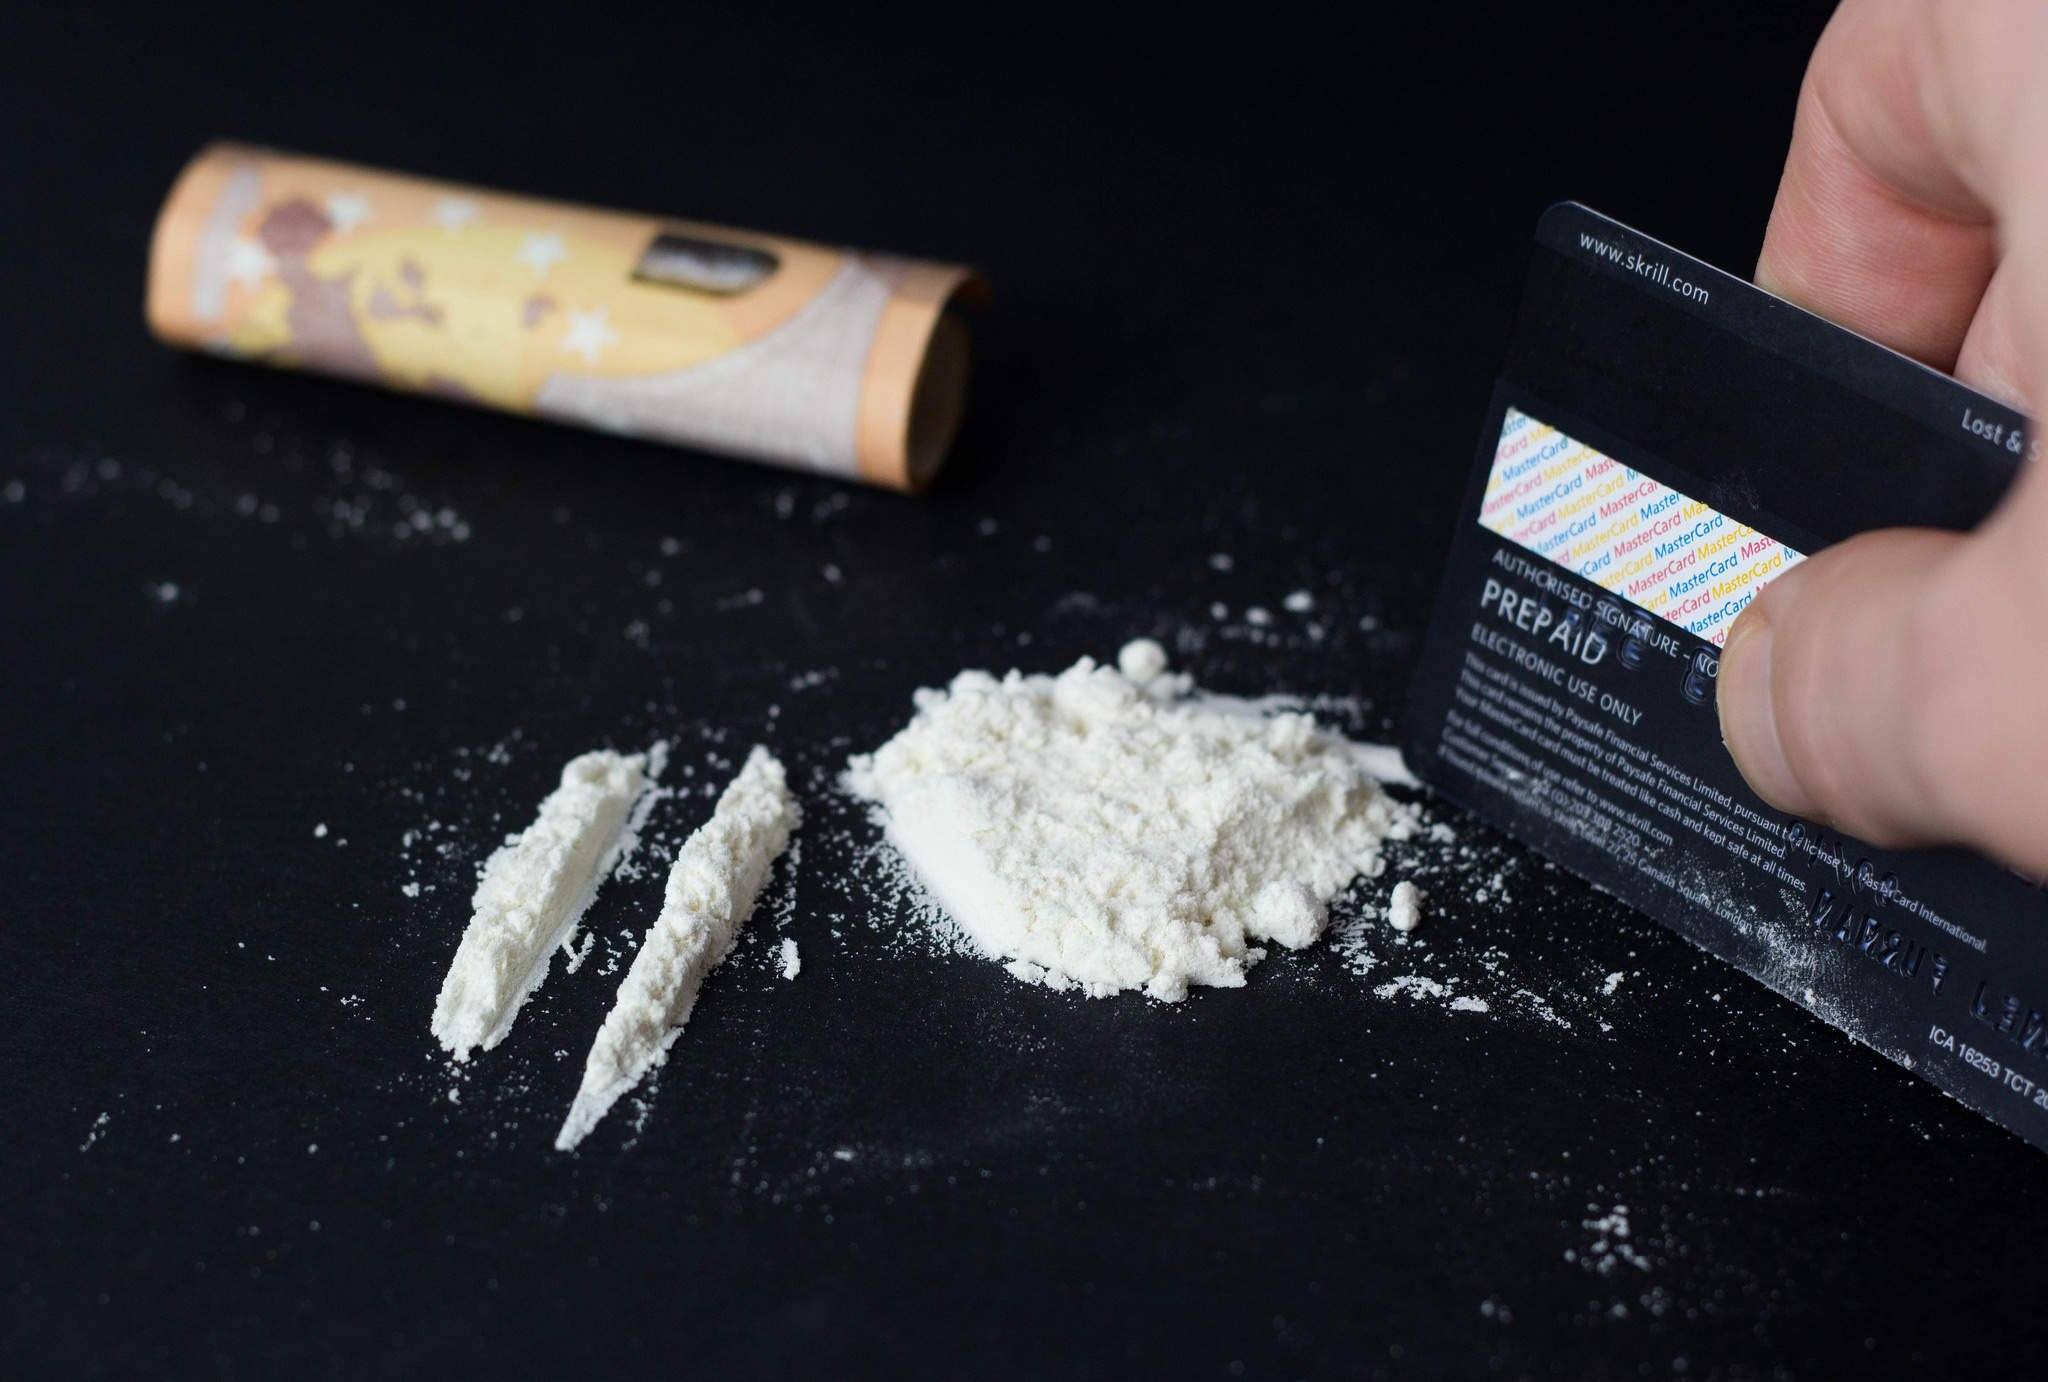 chopping-up-cocaine